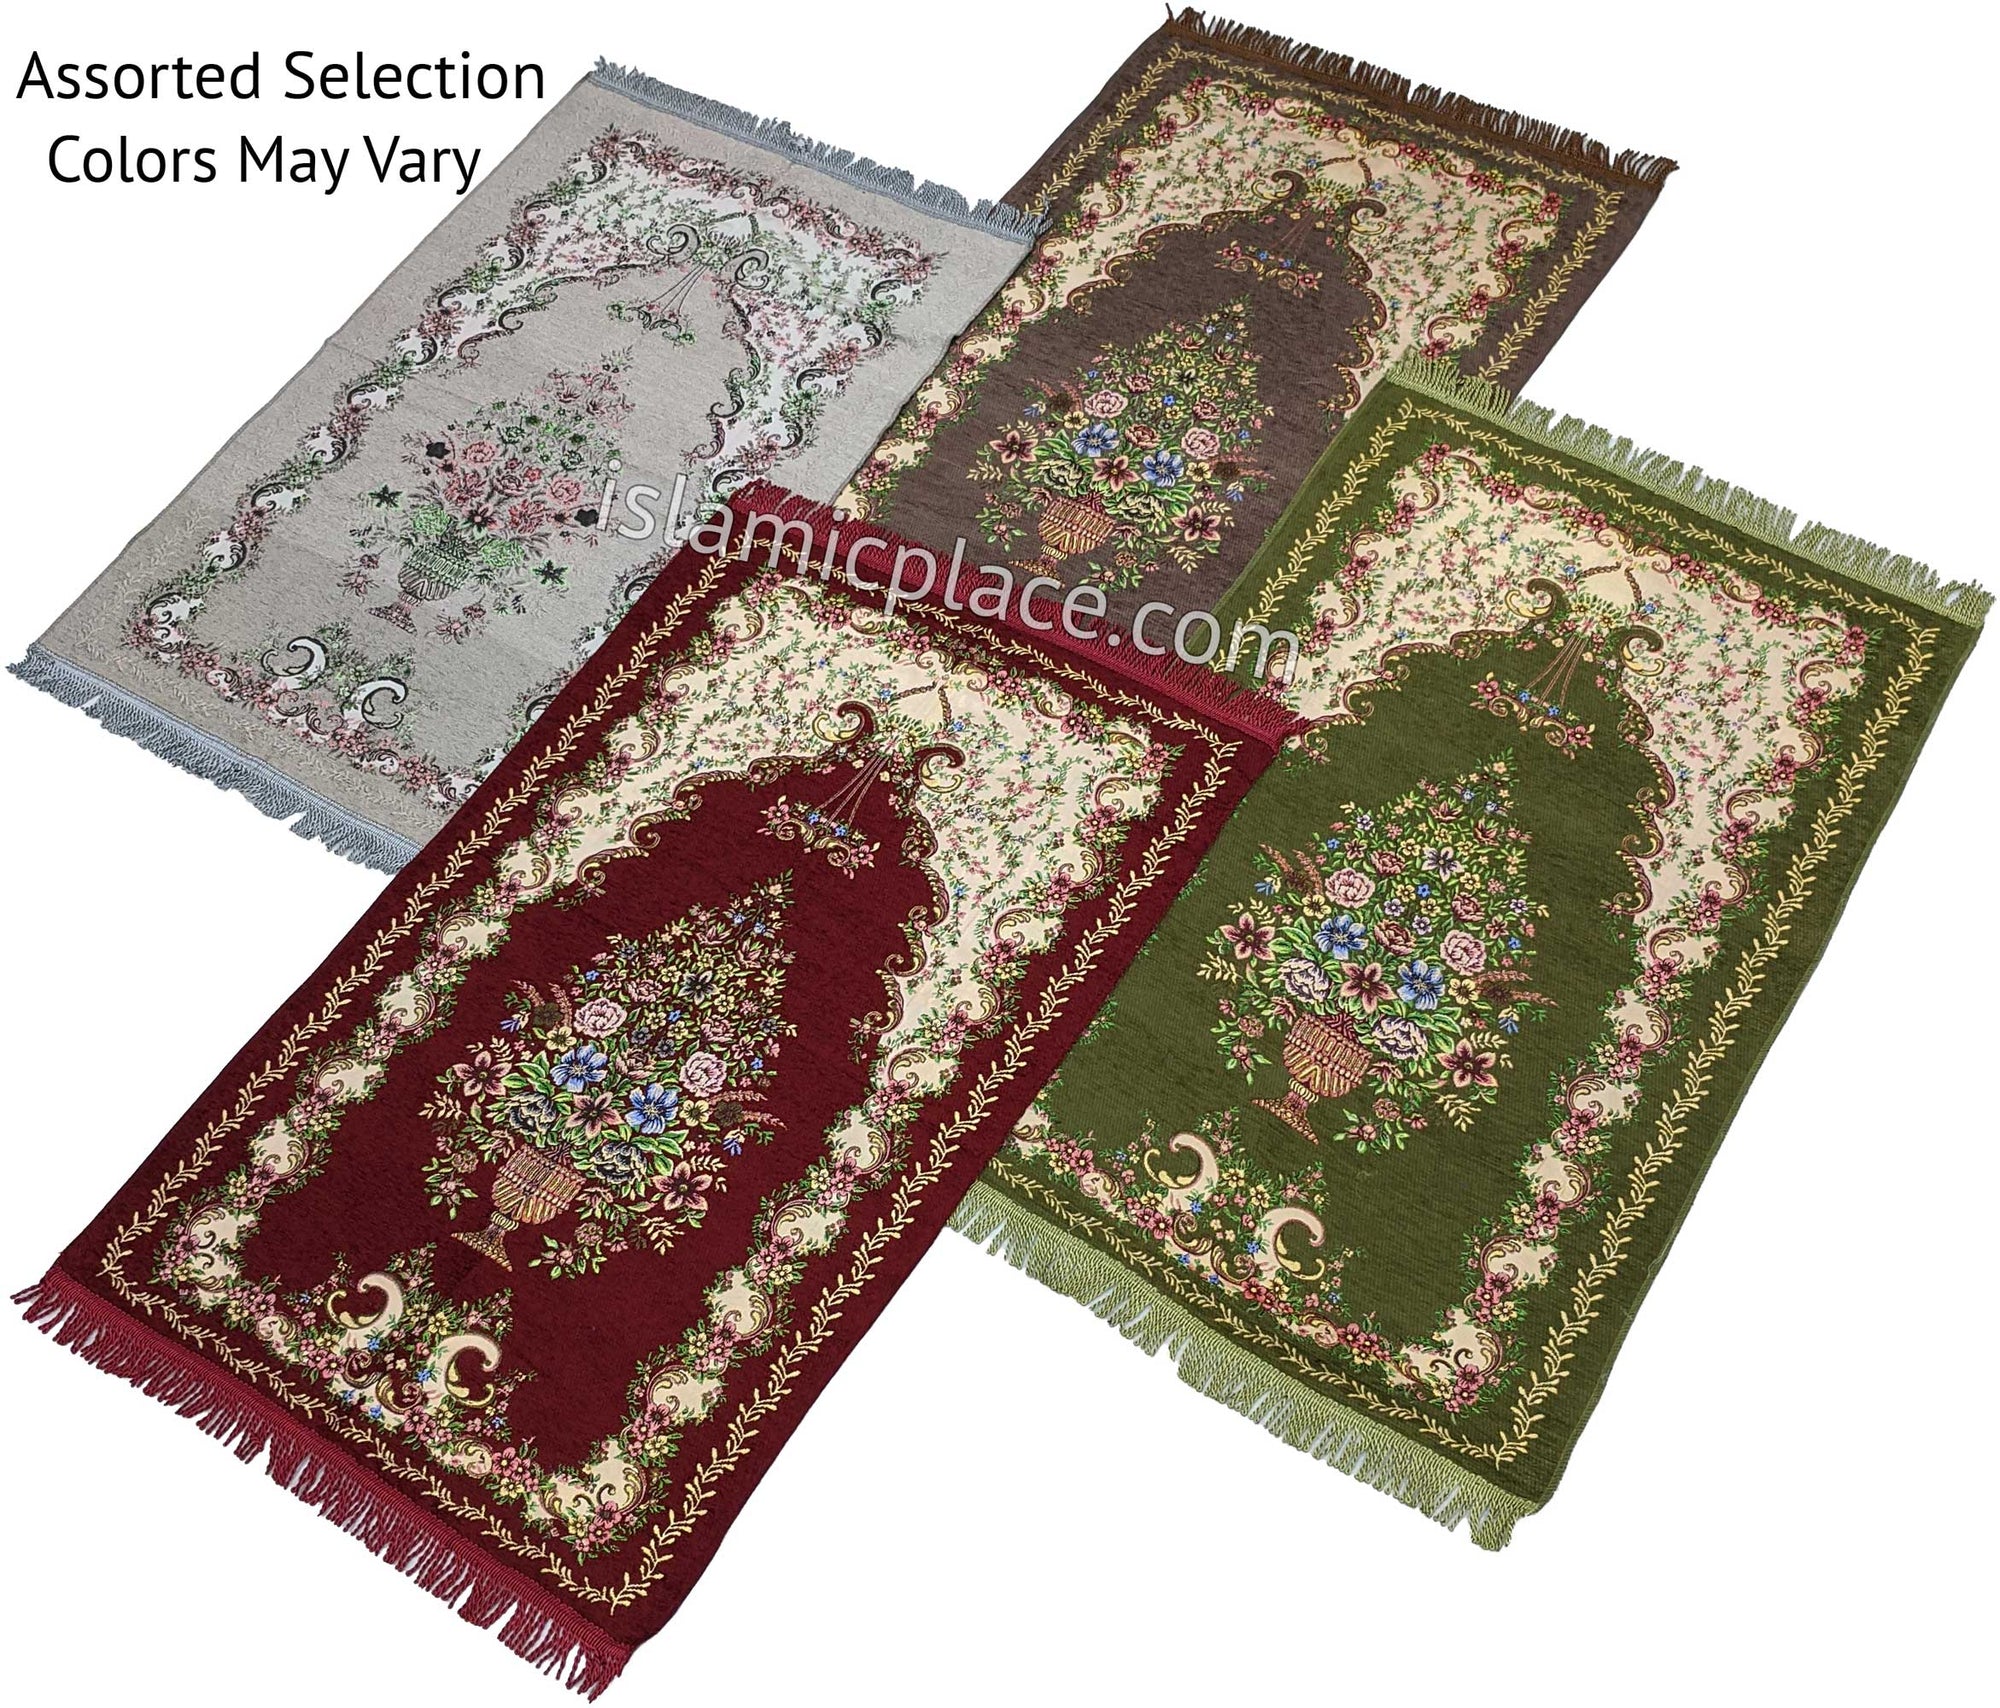 Prayer Rug with Bouquet Mihrab Design - Assorted Color Selection